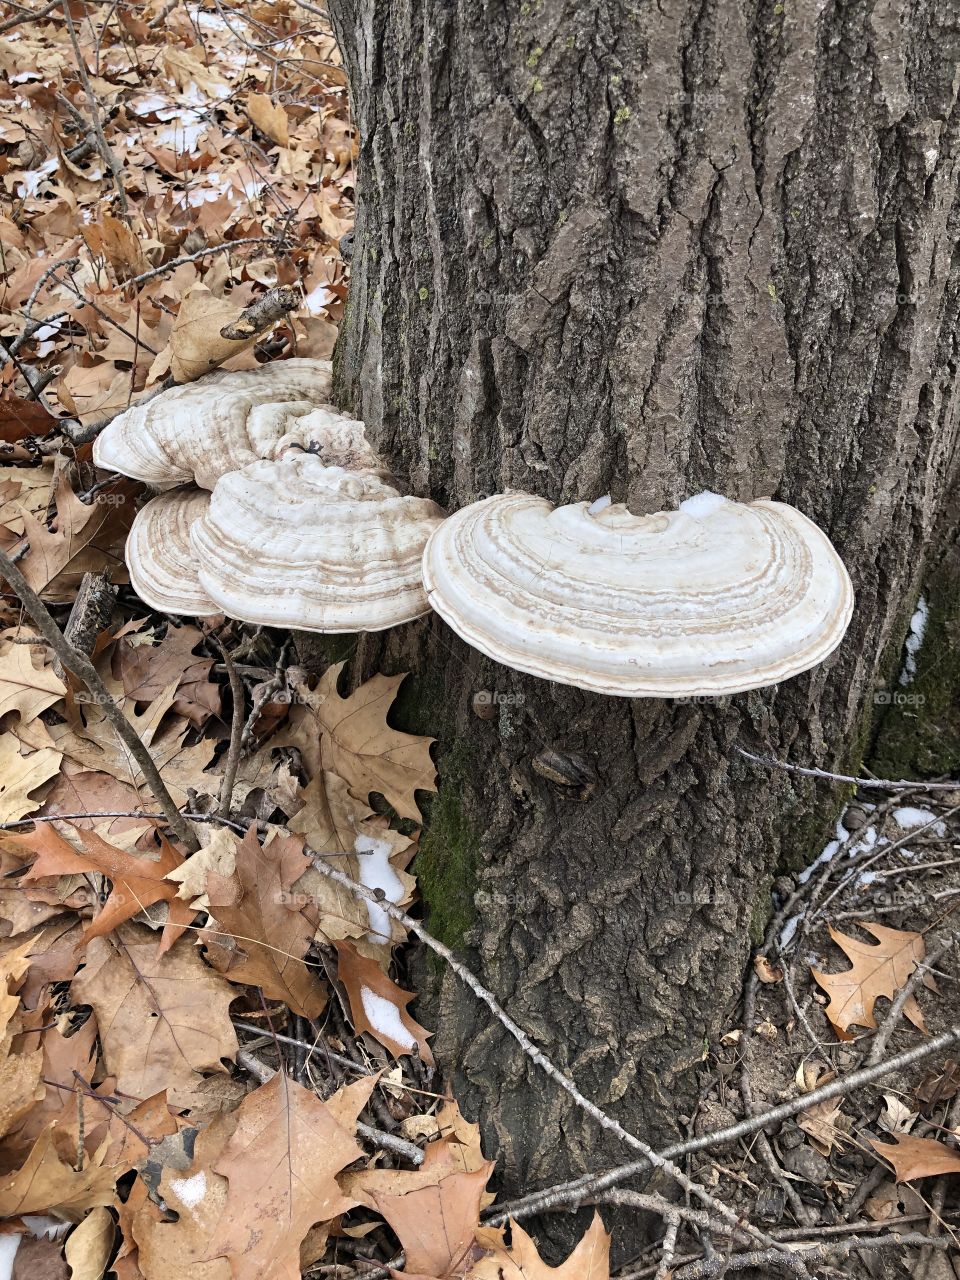 Artists mushrooms in the wild